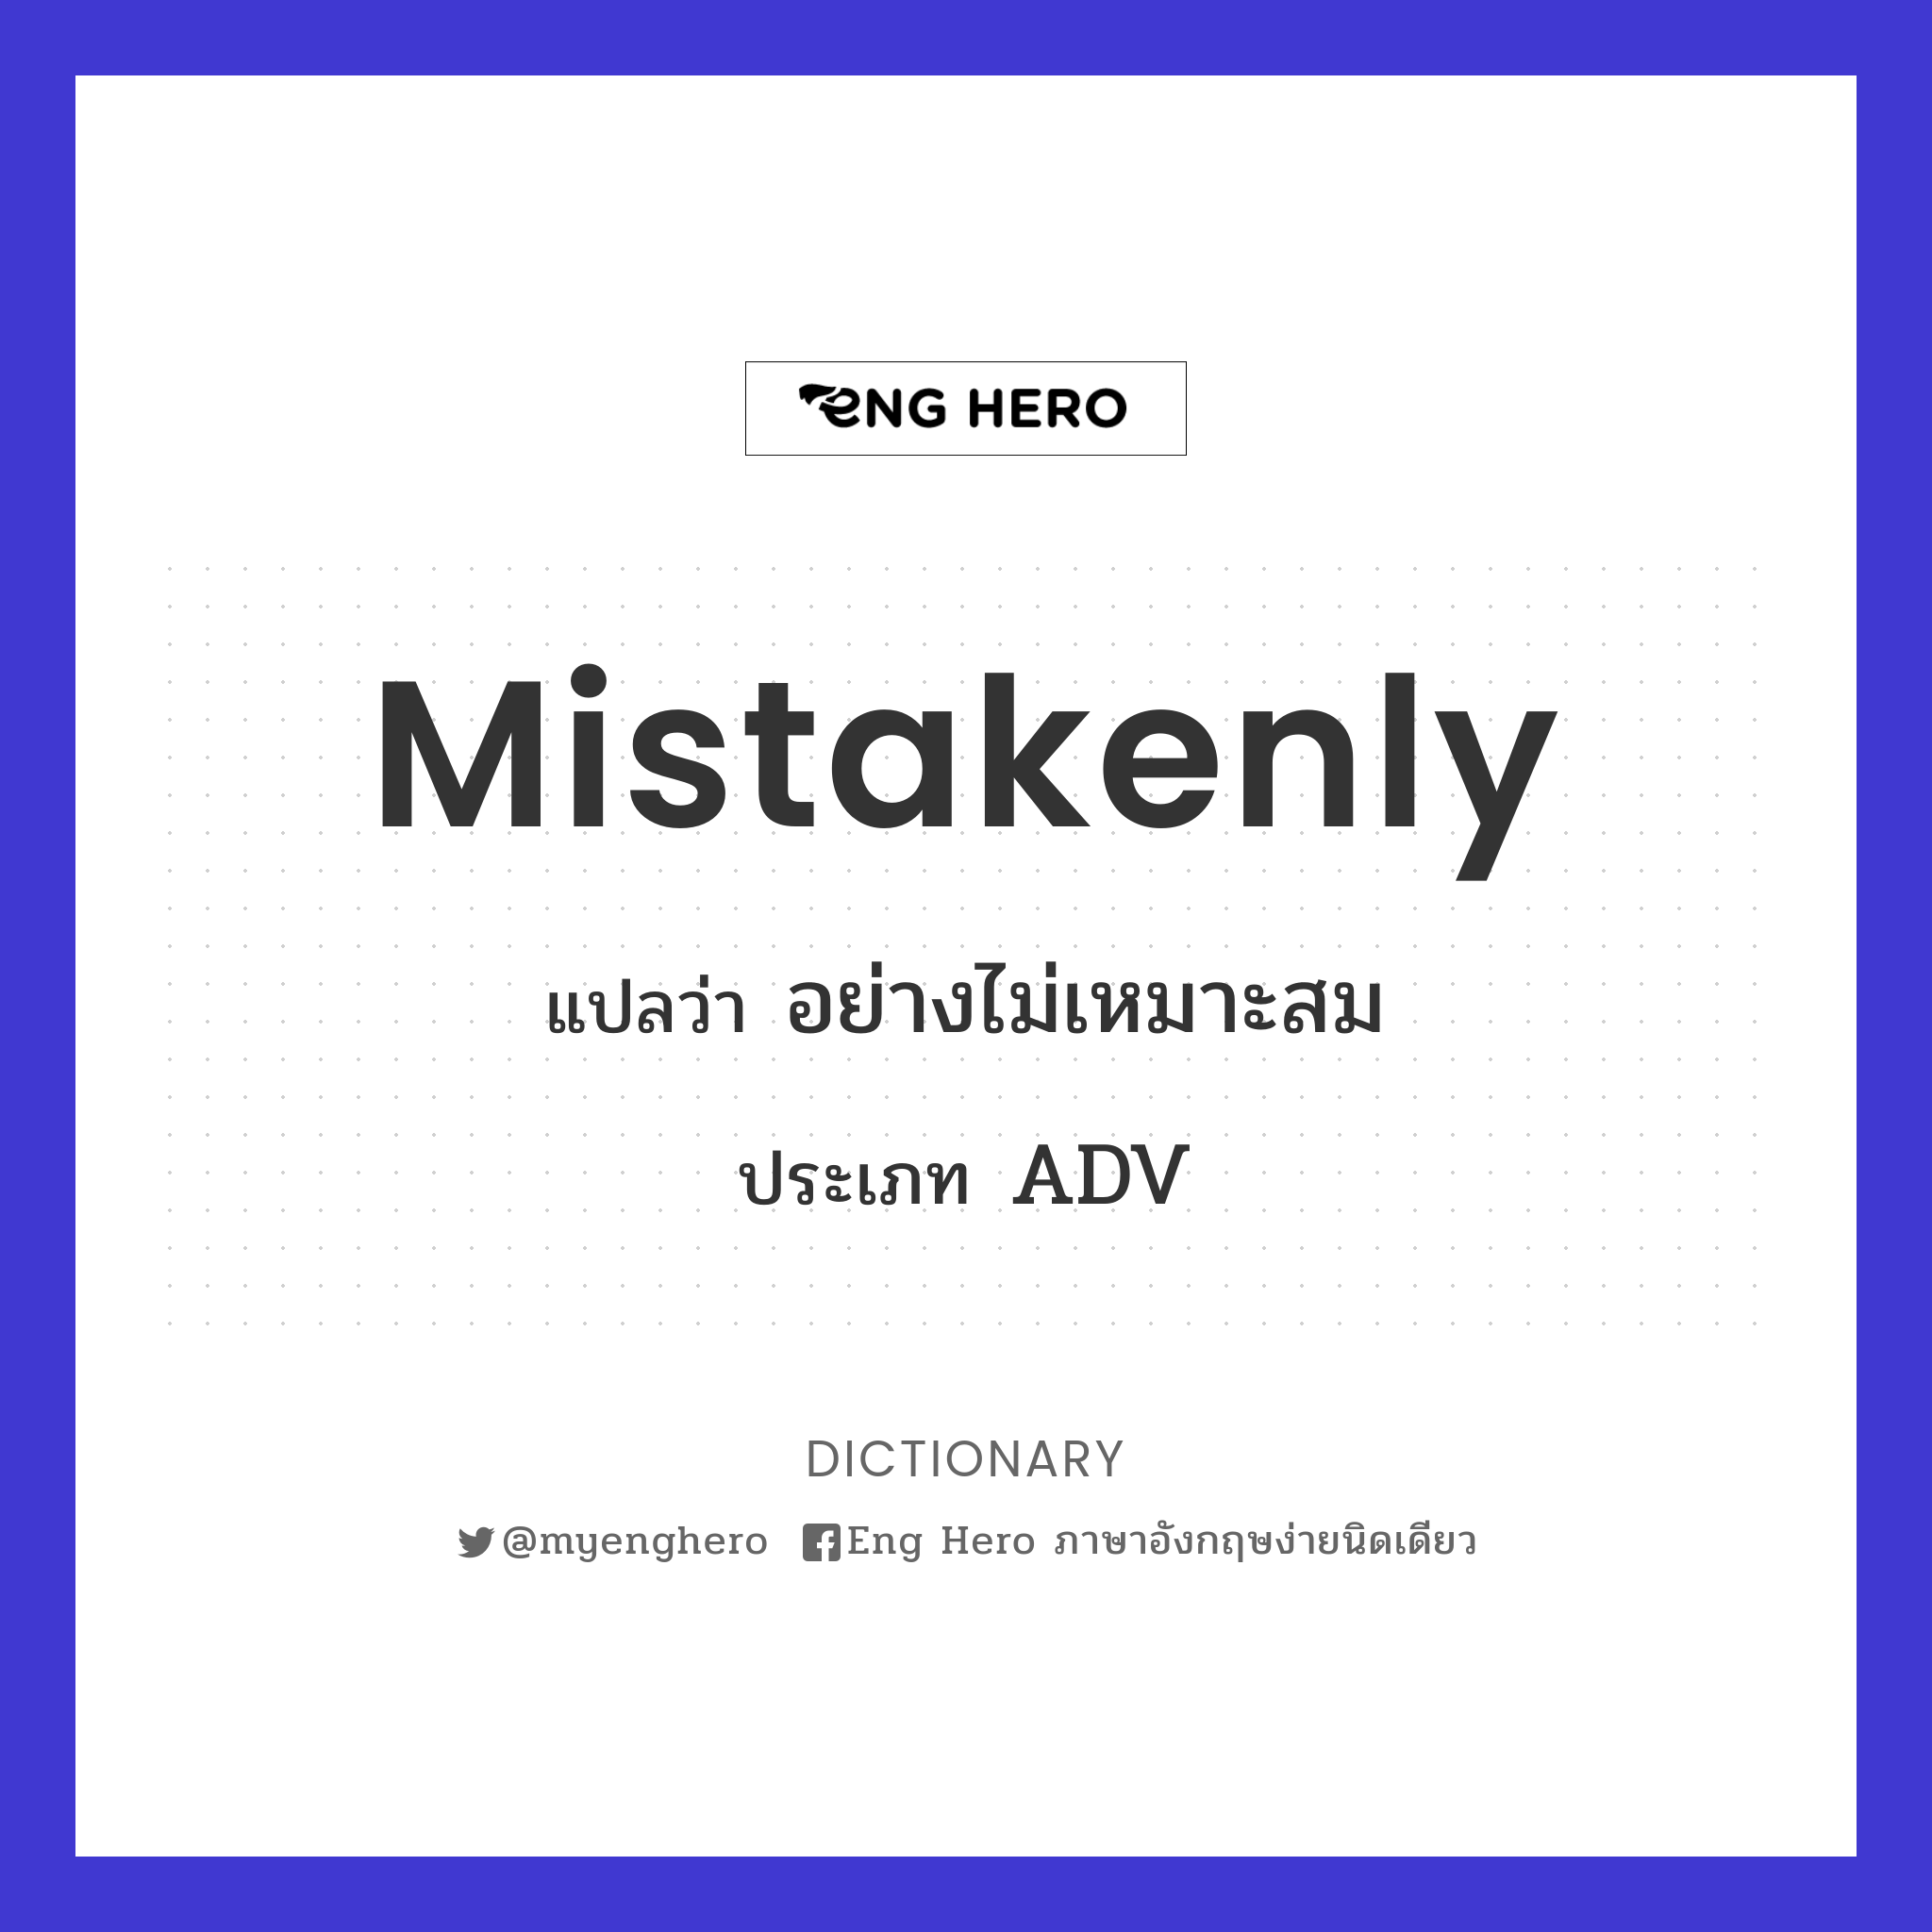 mistakenly